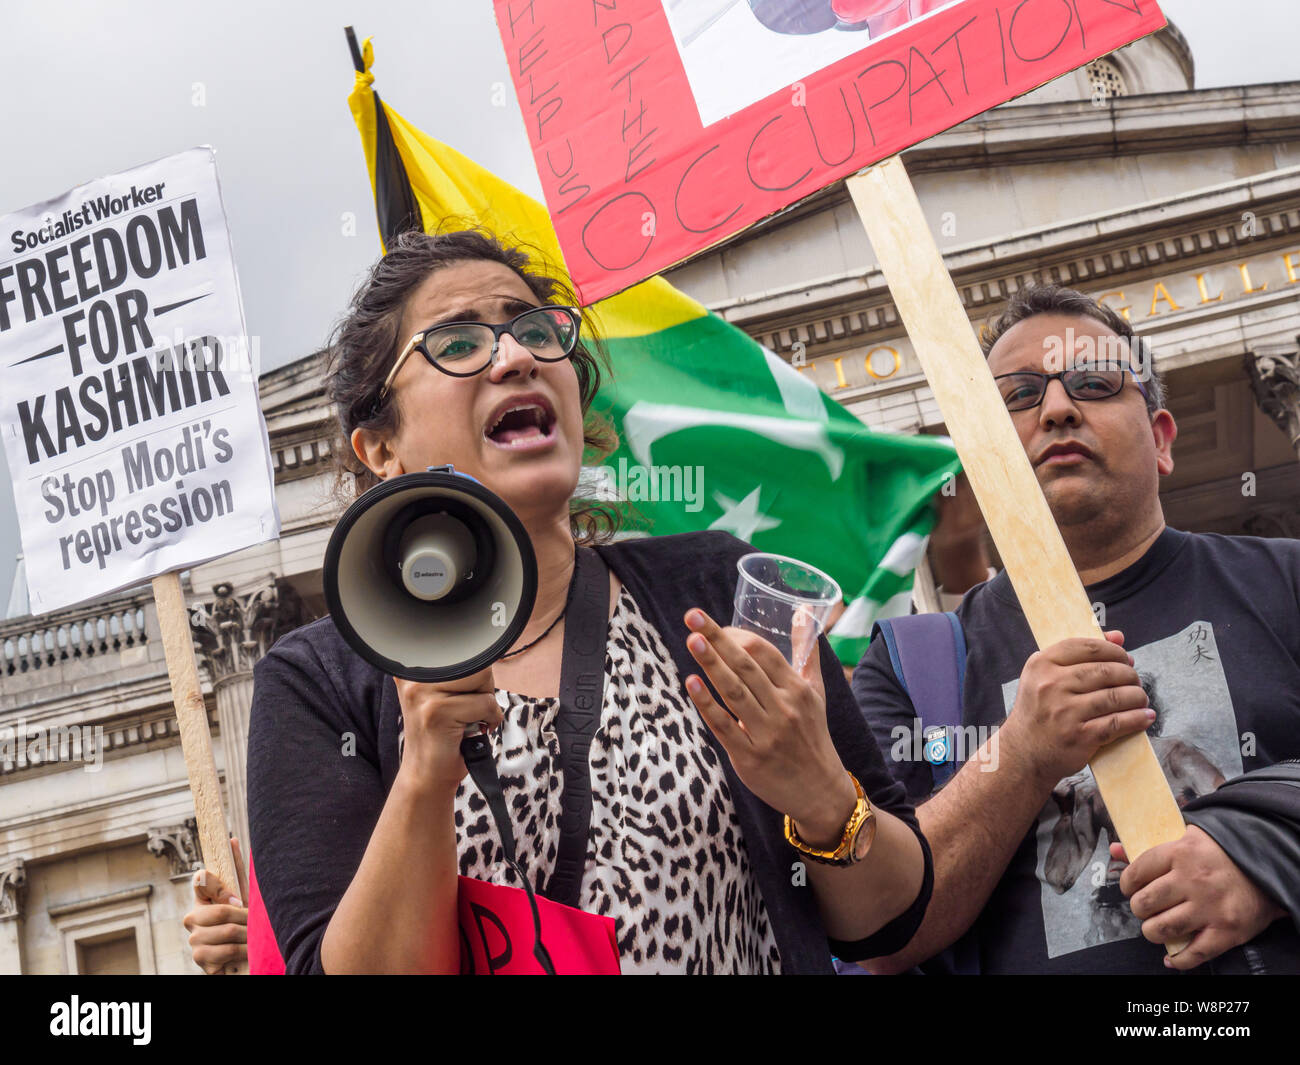 London, UK. 10th August 2019. A woman calls for freedom as Kashmiris protest in Trafalgar Square against India's President Modi who revoked Article 370 of the Indian Constitution which guaranteed significant autonomy to the Muslim-majority state of Kashmir after the Independence partition of India and Pakistan. Kashmiris have been calling for independence, with armed revolt since 1989 suppressed by torture, deliberate blinding and killings by a huge Indian occupying force. They call Modi a Hindu fascist who has united the country against India.Peter Marshall/Alamy Live News Stock Photo